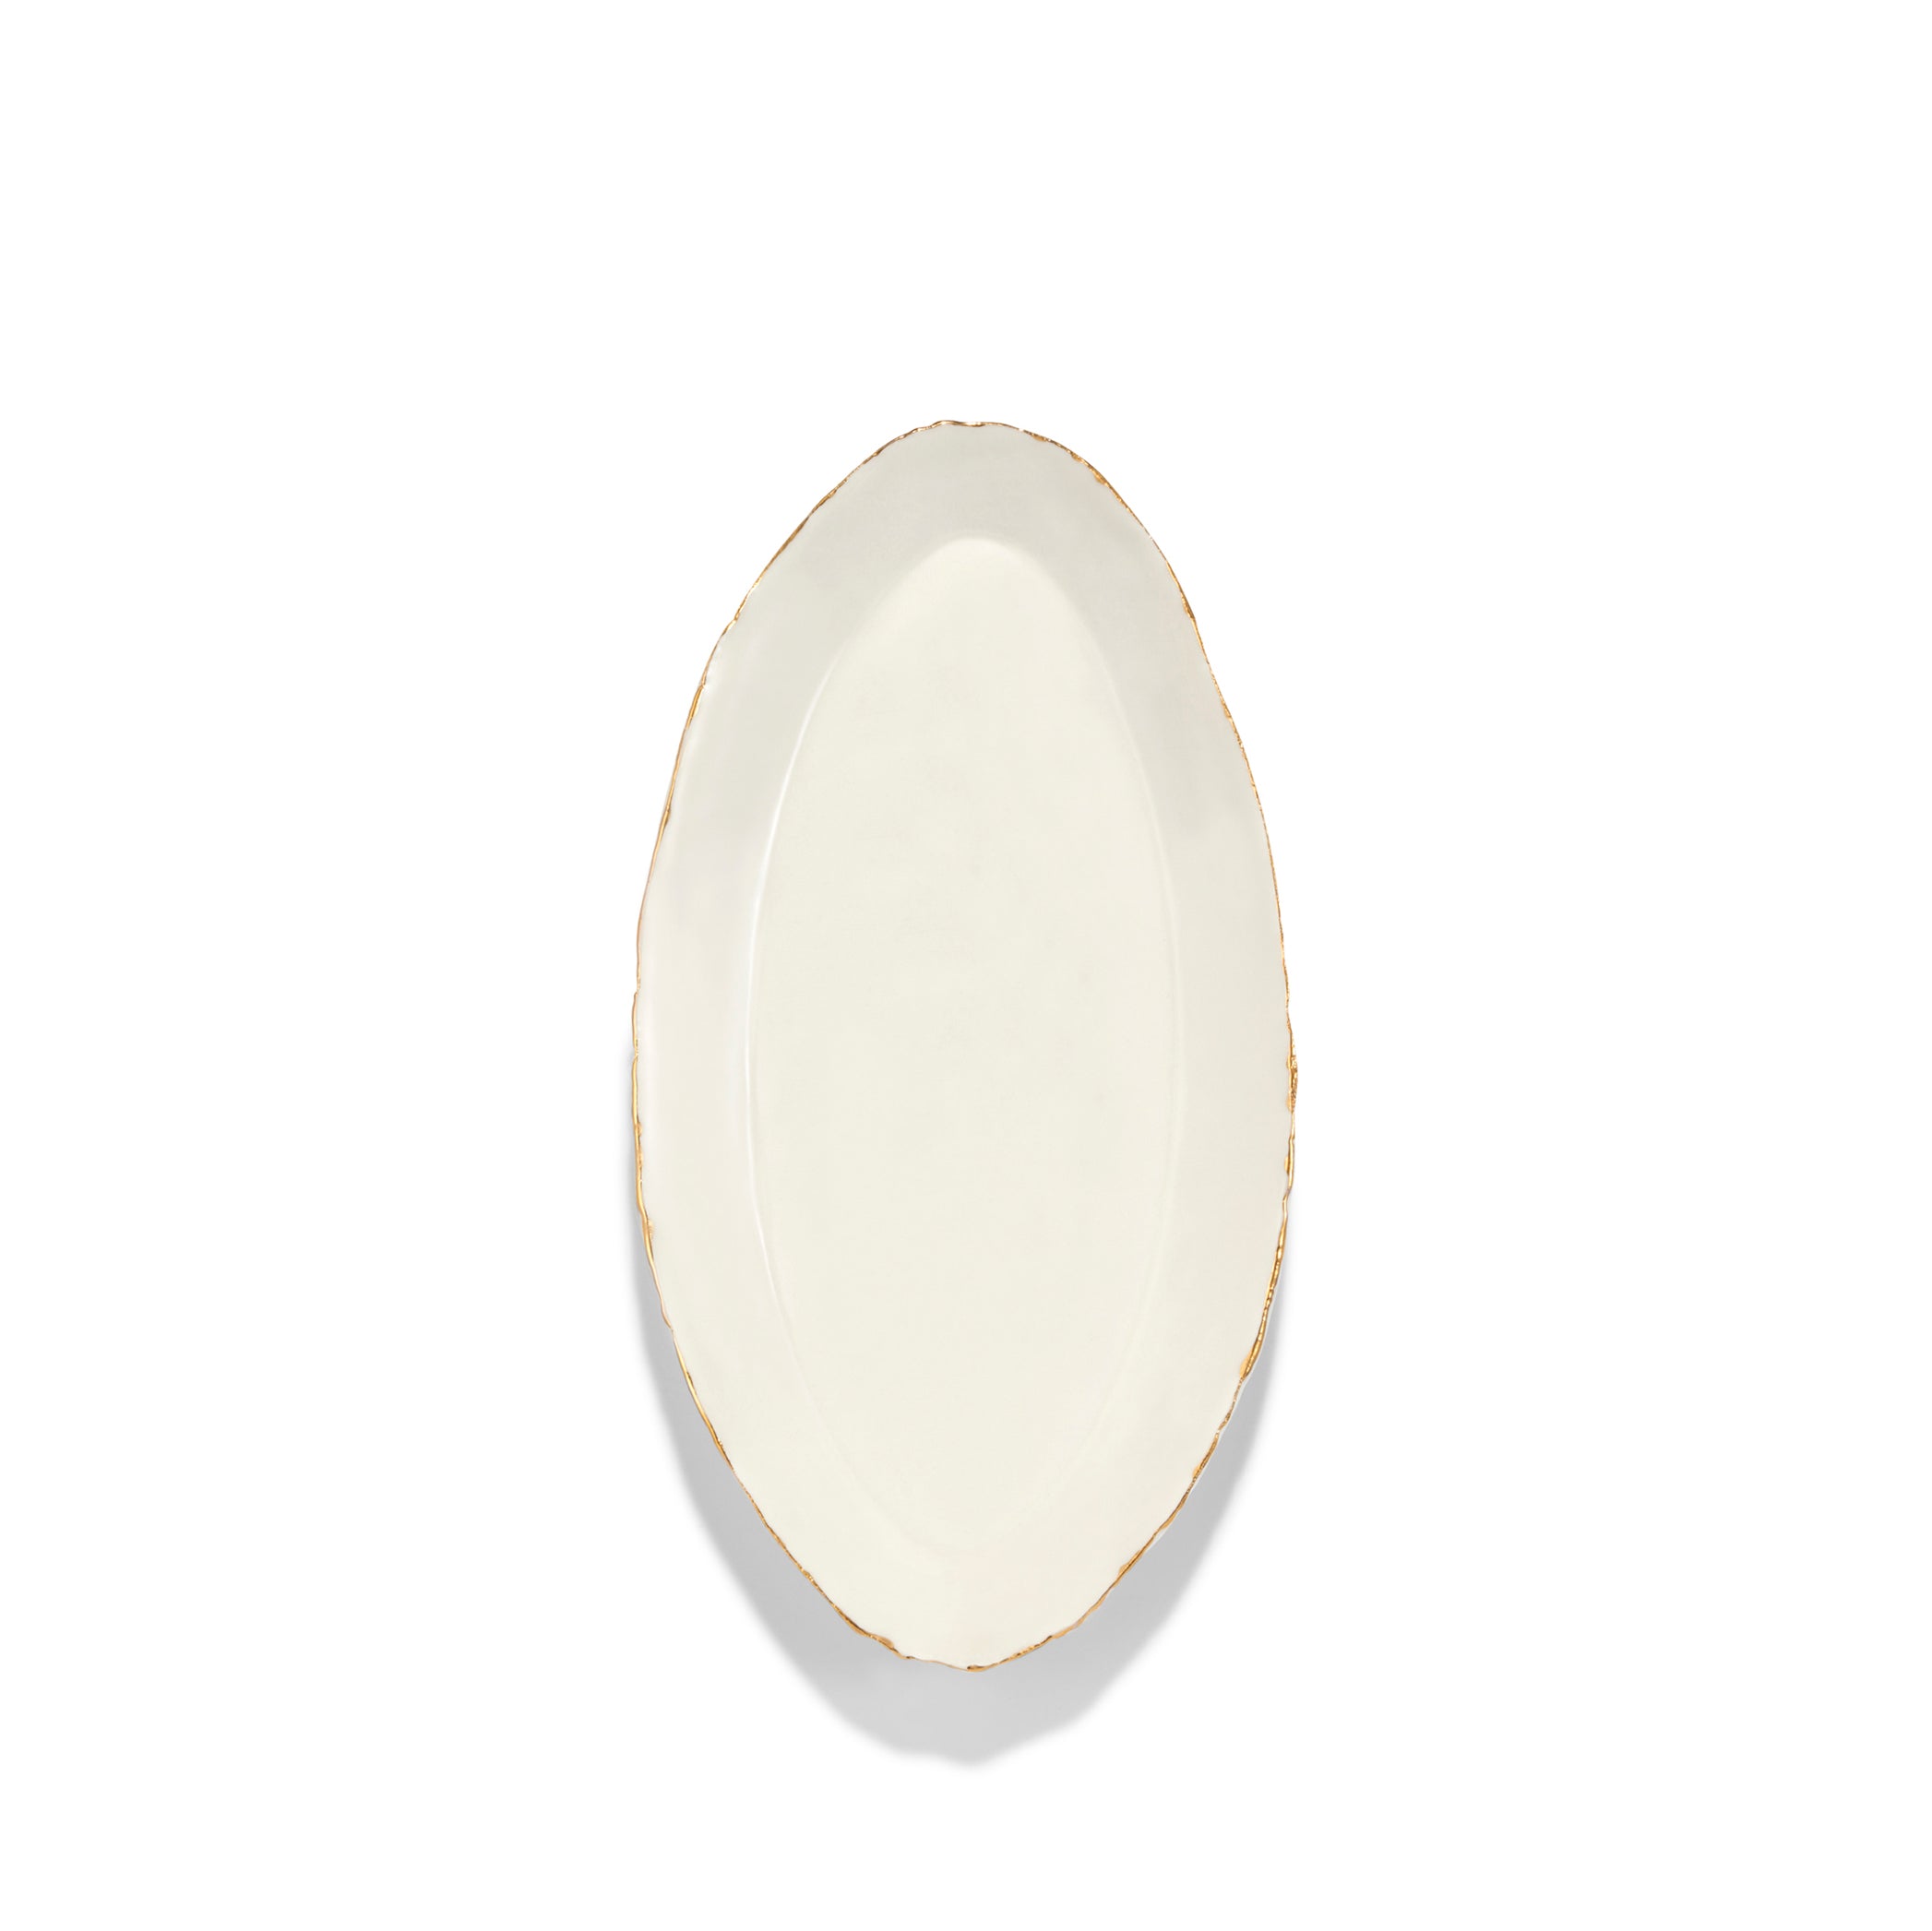 HB Jagged Oval Tray, 23cm